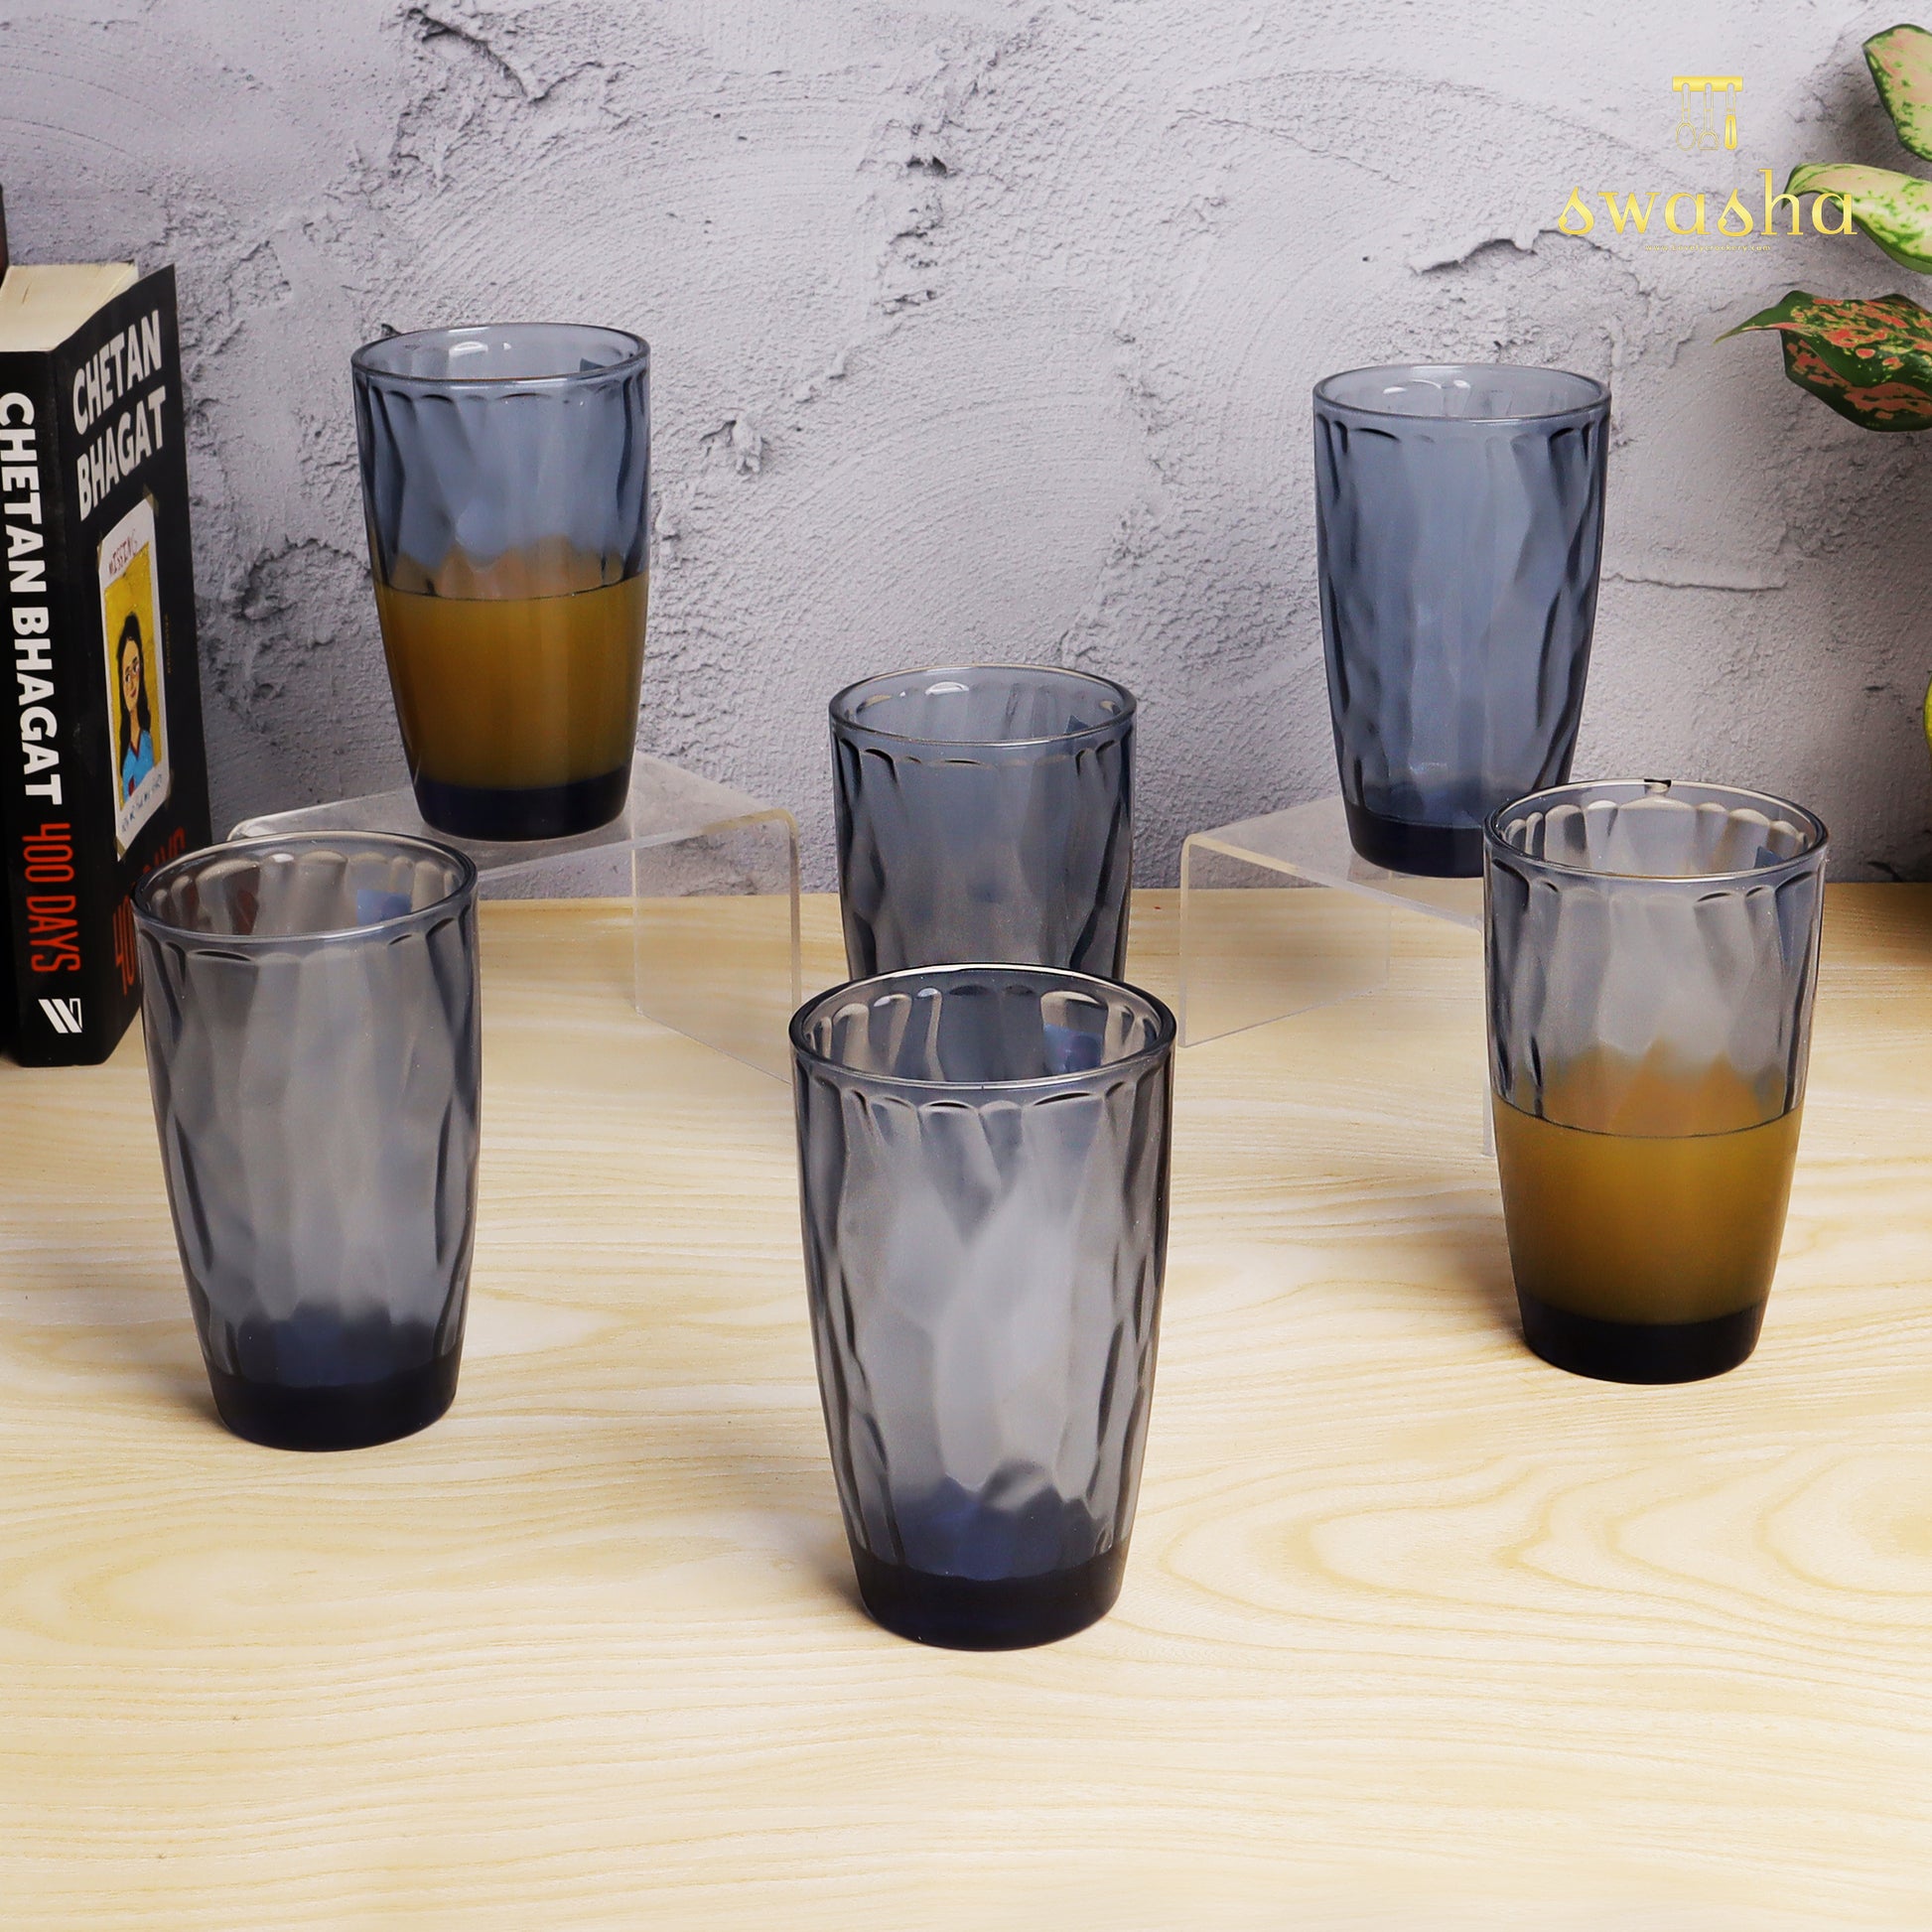 Set of 6 versatile glass tumblers - perfect for refreshing juices and water.